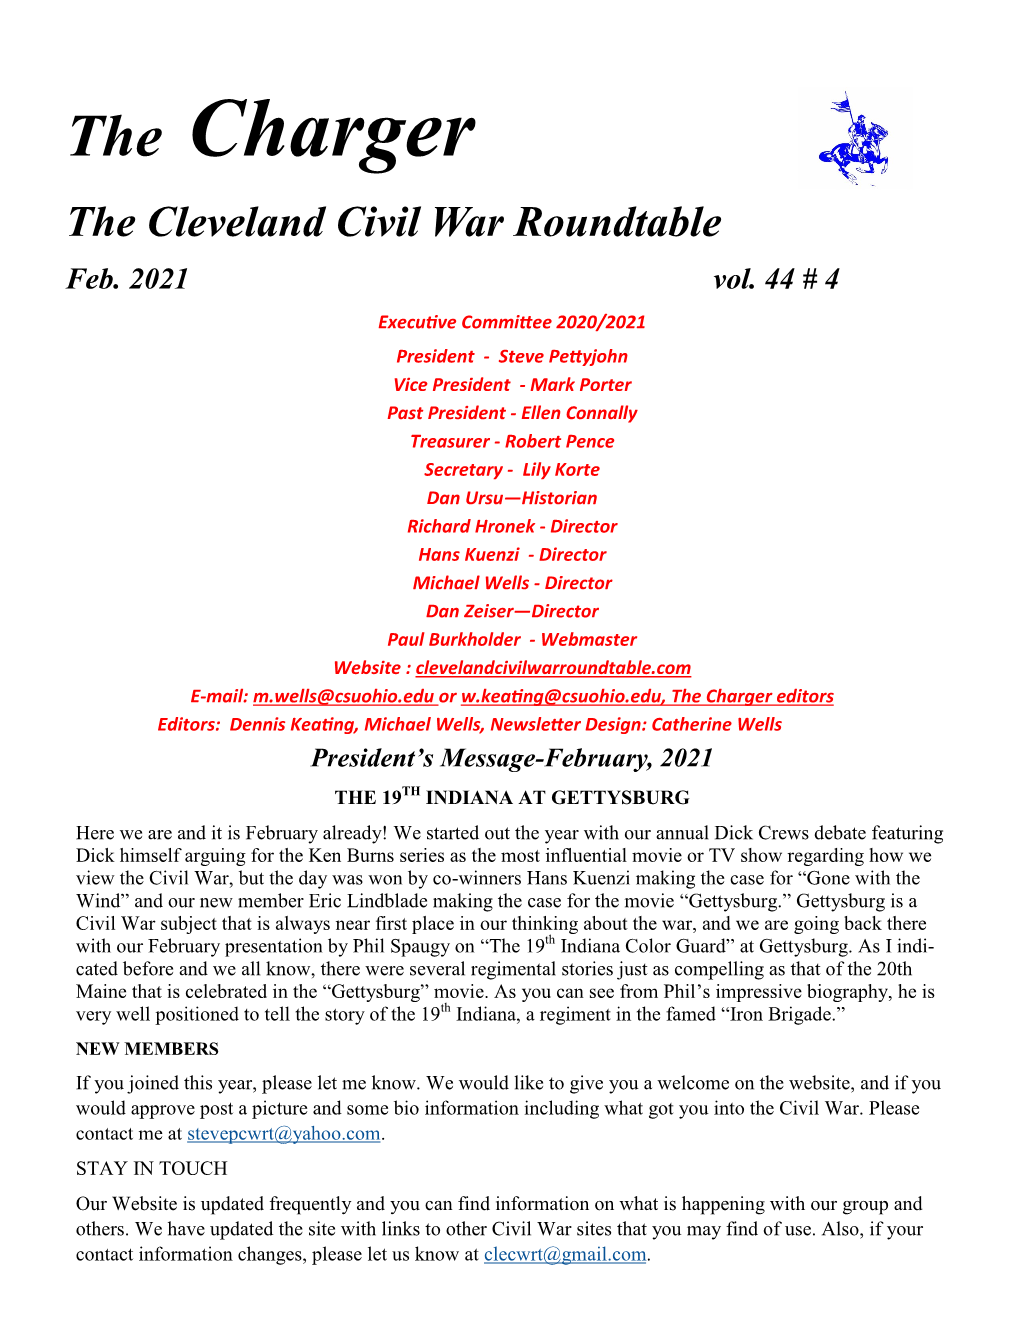 The Charger the Cleveland Civil War Roundtable Feb